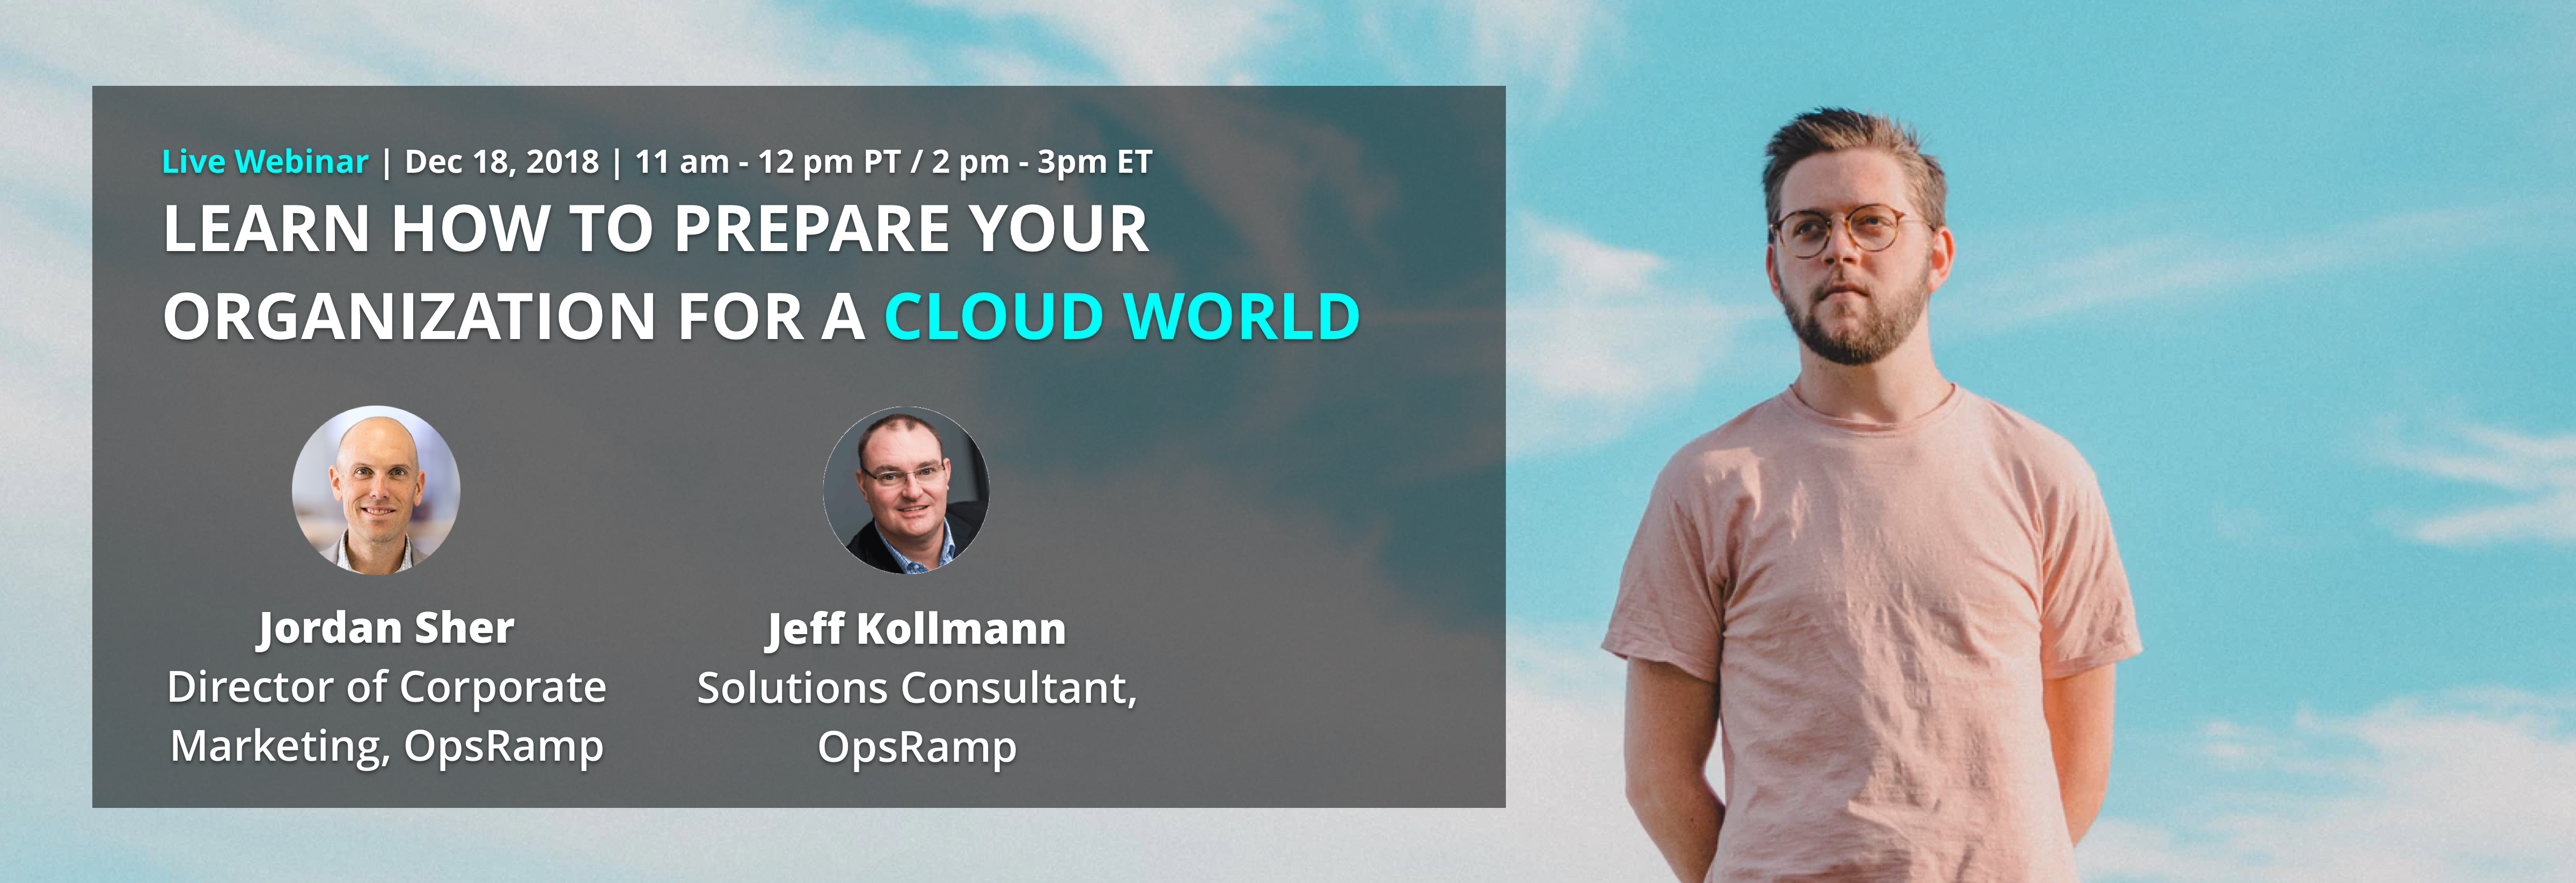 [Webinar] Learn How to Prepare Your Organization for a Cloud World